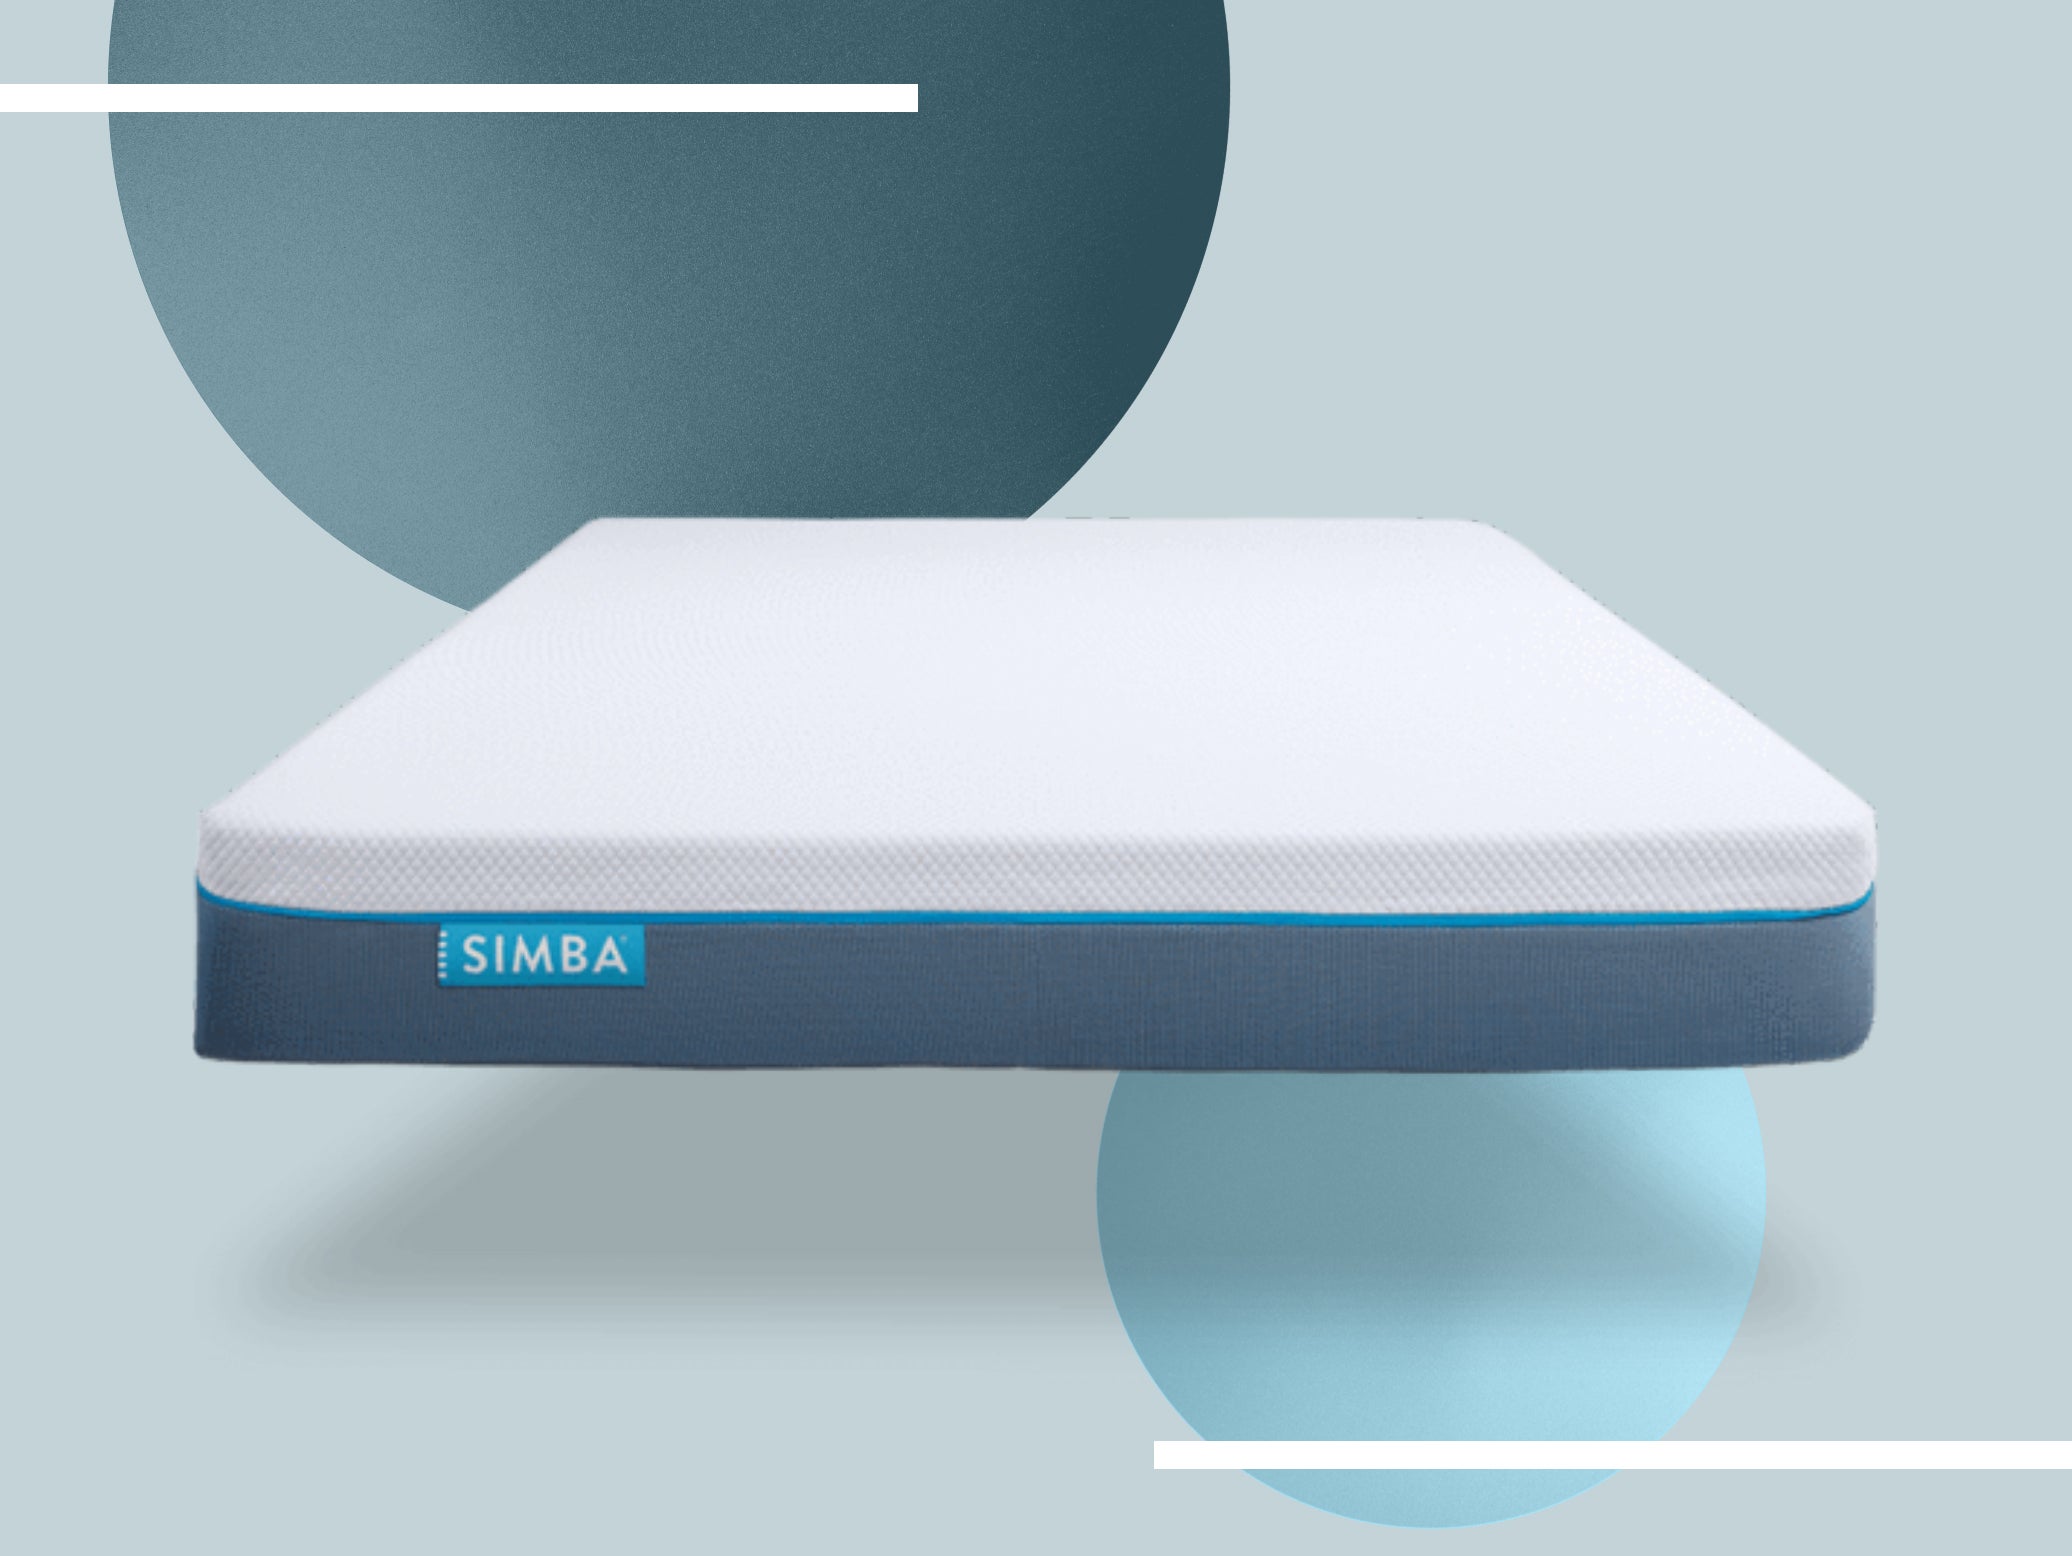 Get ready for a great night’s sleep on your new discounted mattress